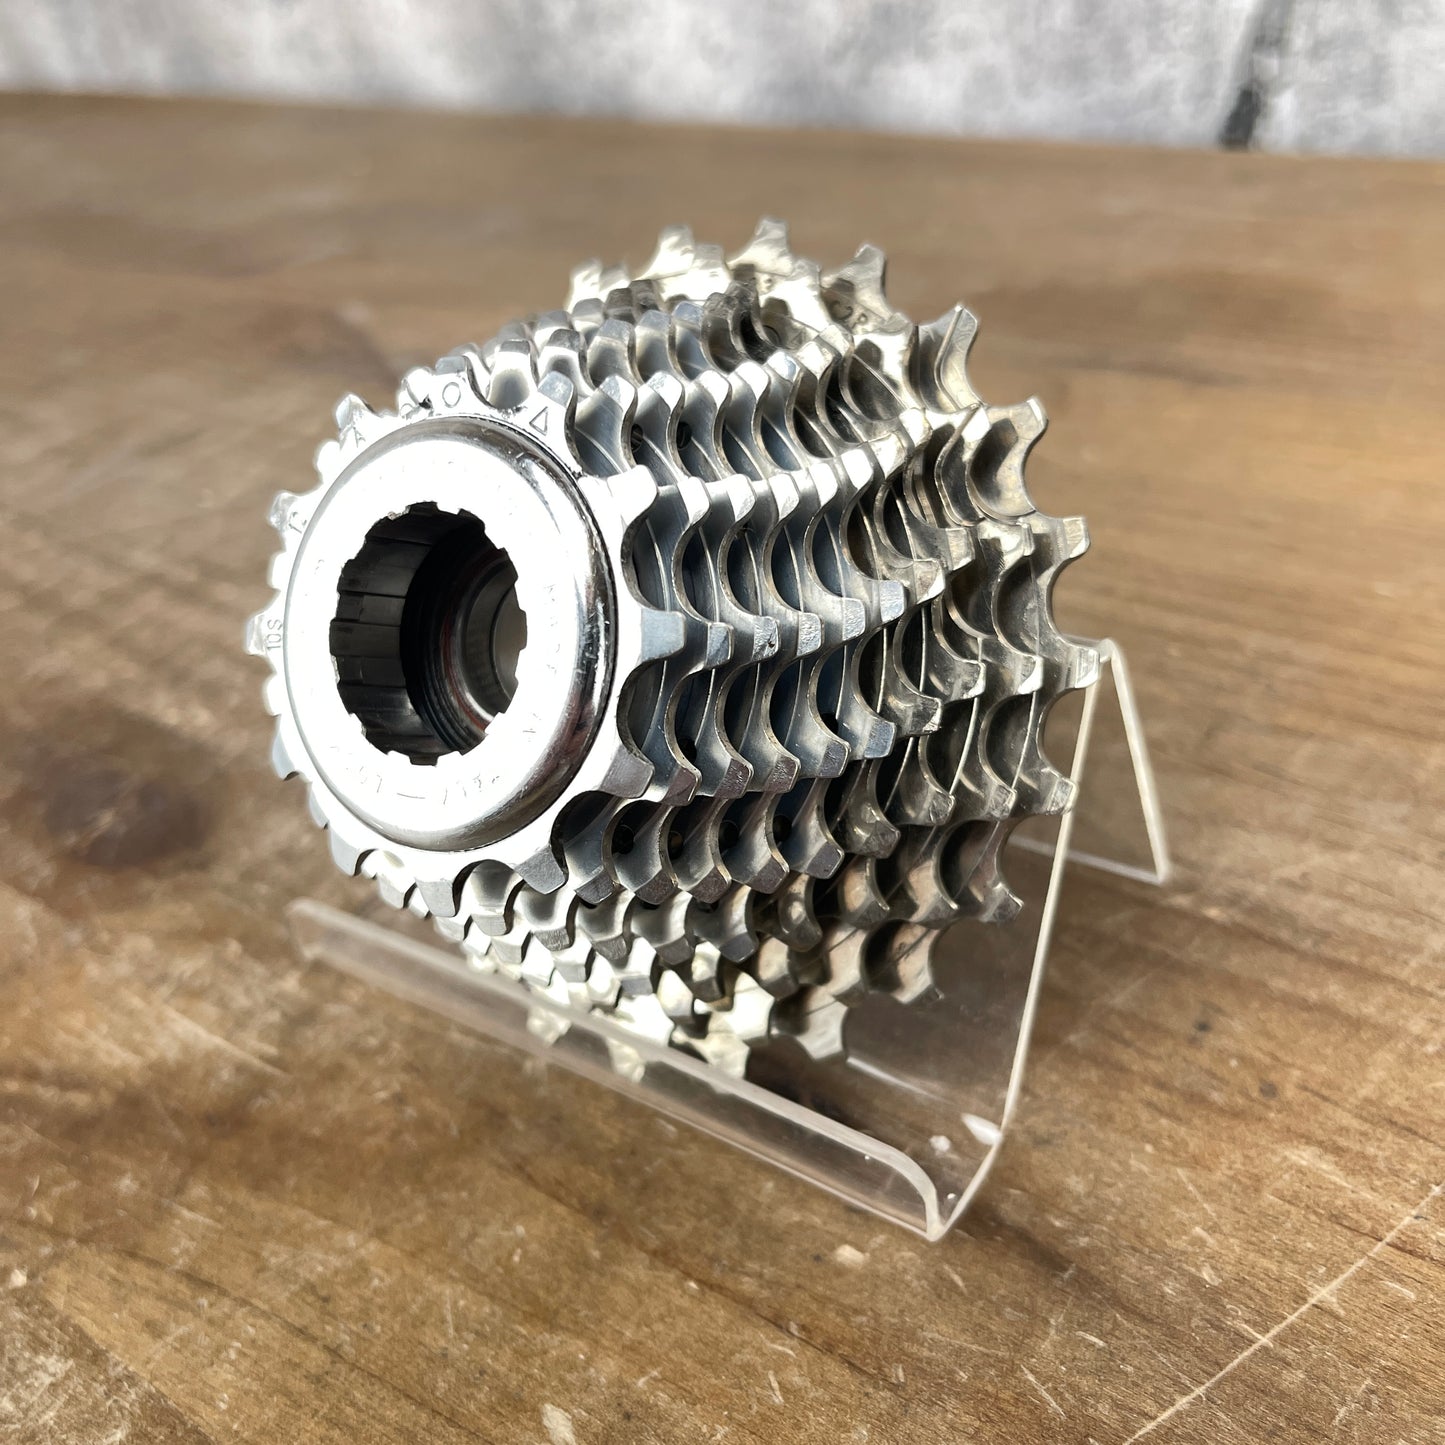 Campagnolo Record 10-Speed 12-23t Road Bike Cassette "Typical Wear" 201g